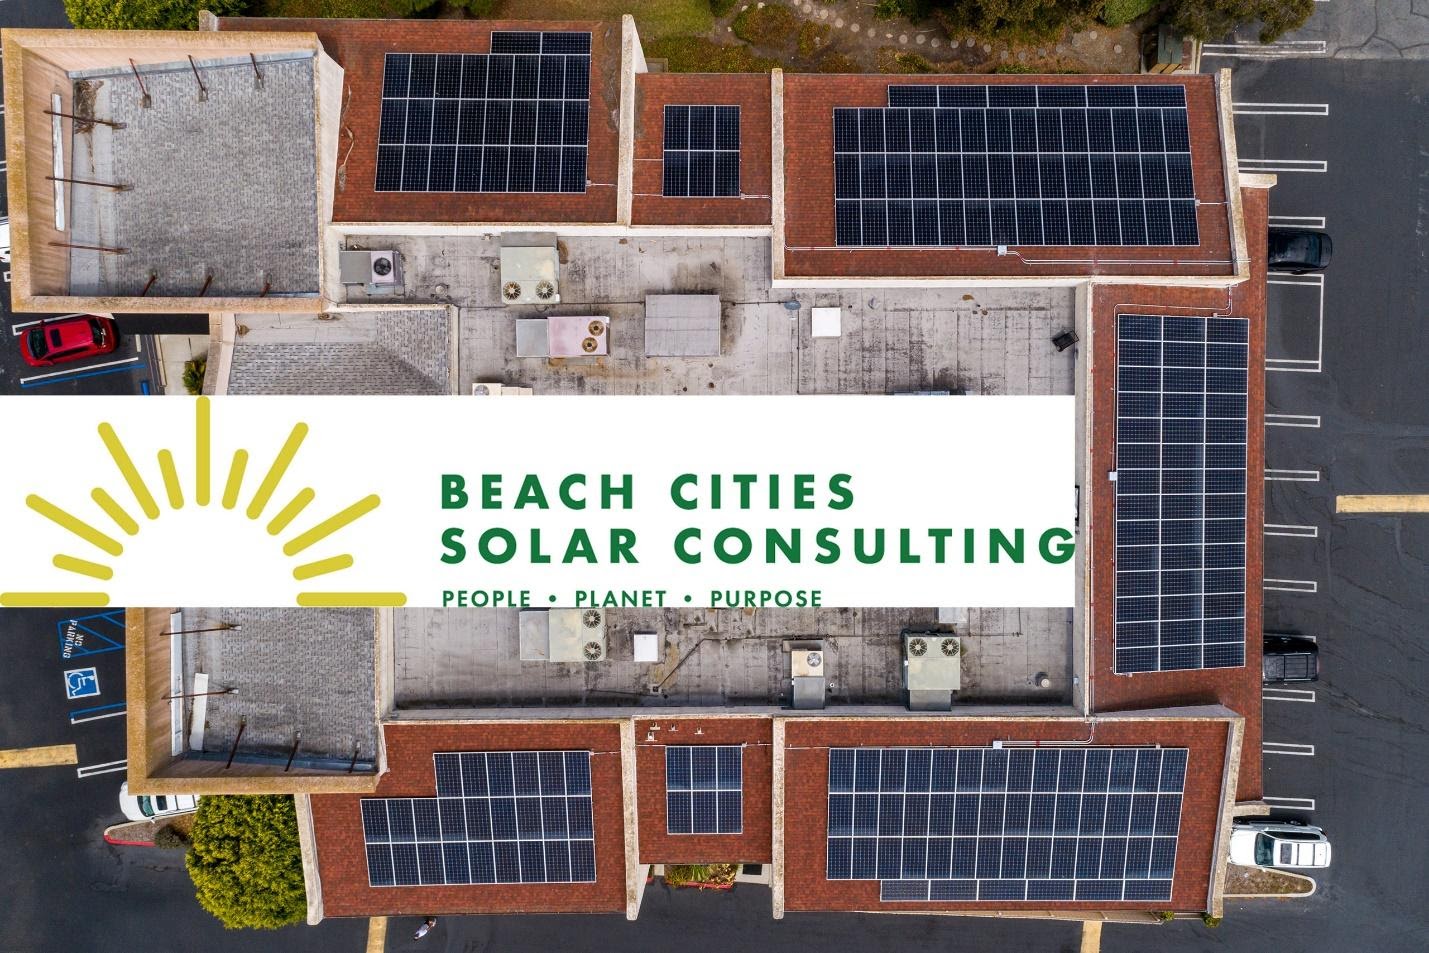 Solar Consulting and panels